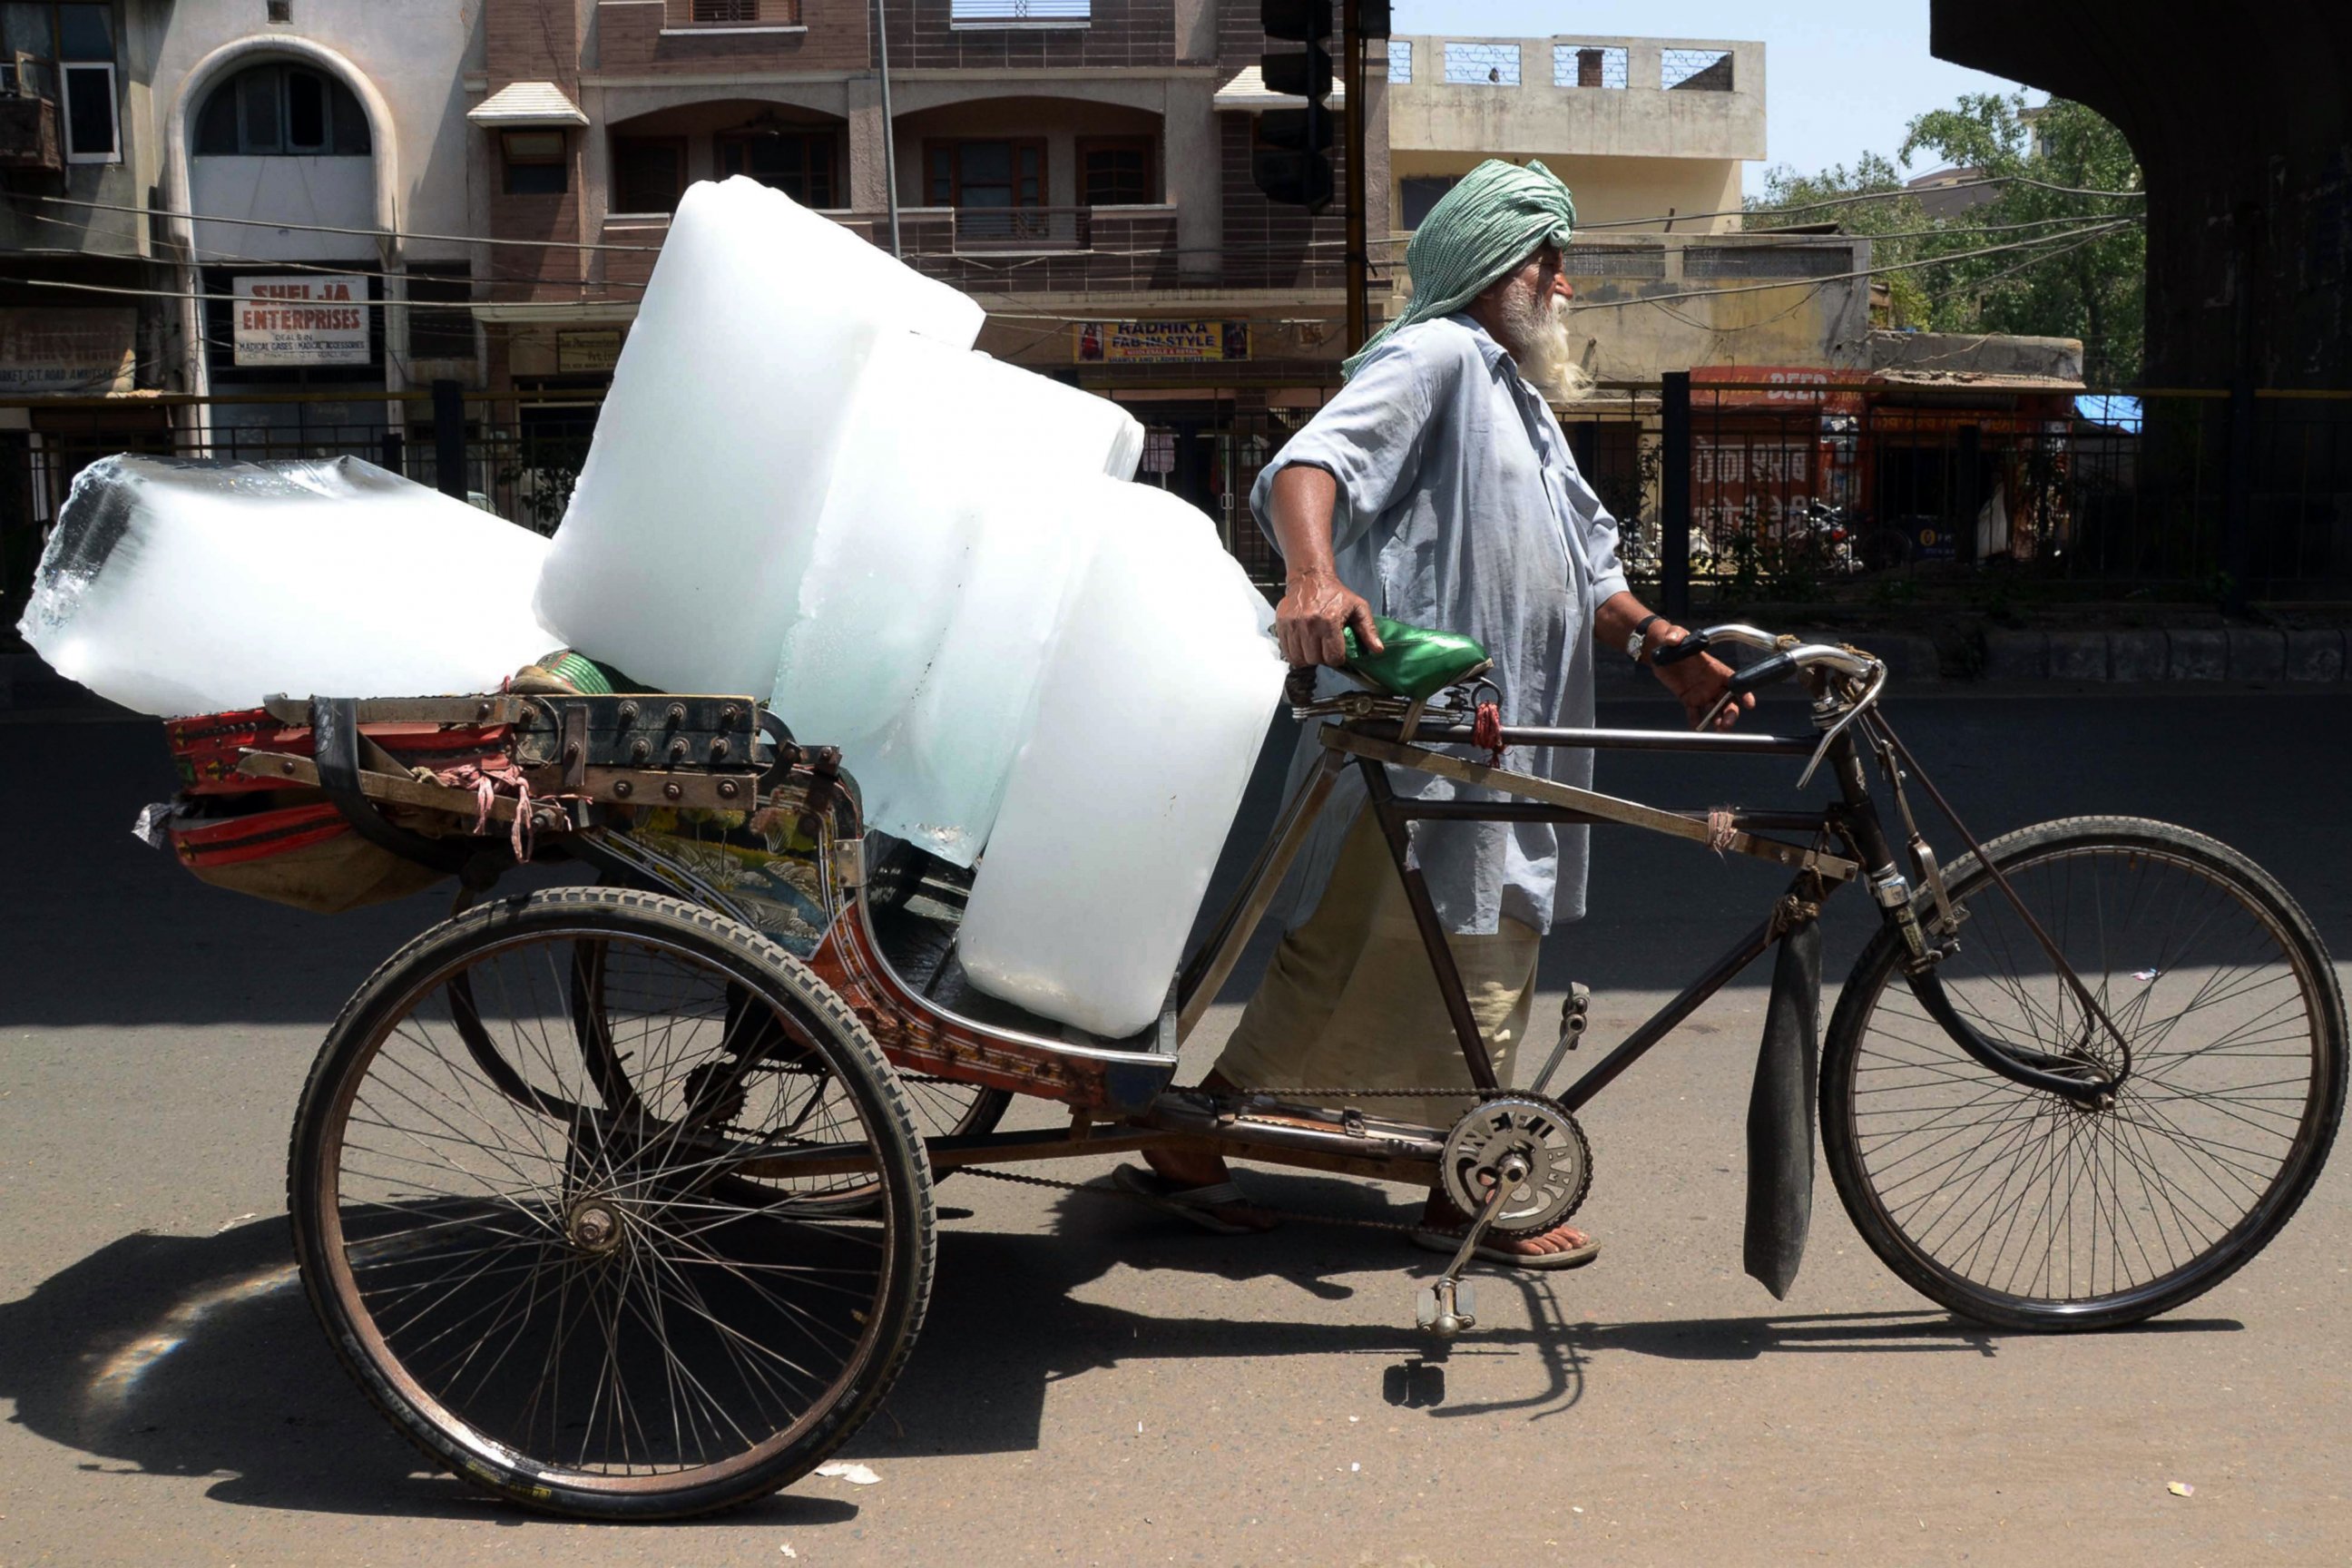 PHOTO: An Indian worker uses a ricksahw to transport ice from an ice factory in Amritsar on May 27, 2015.